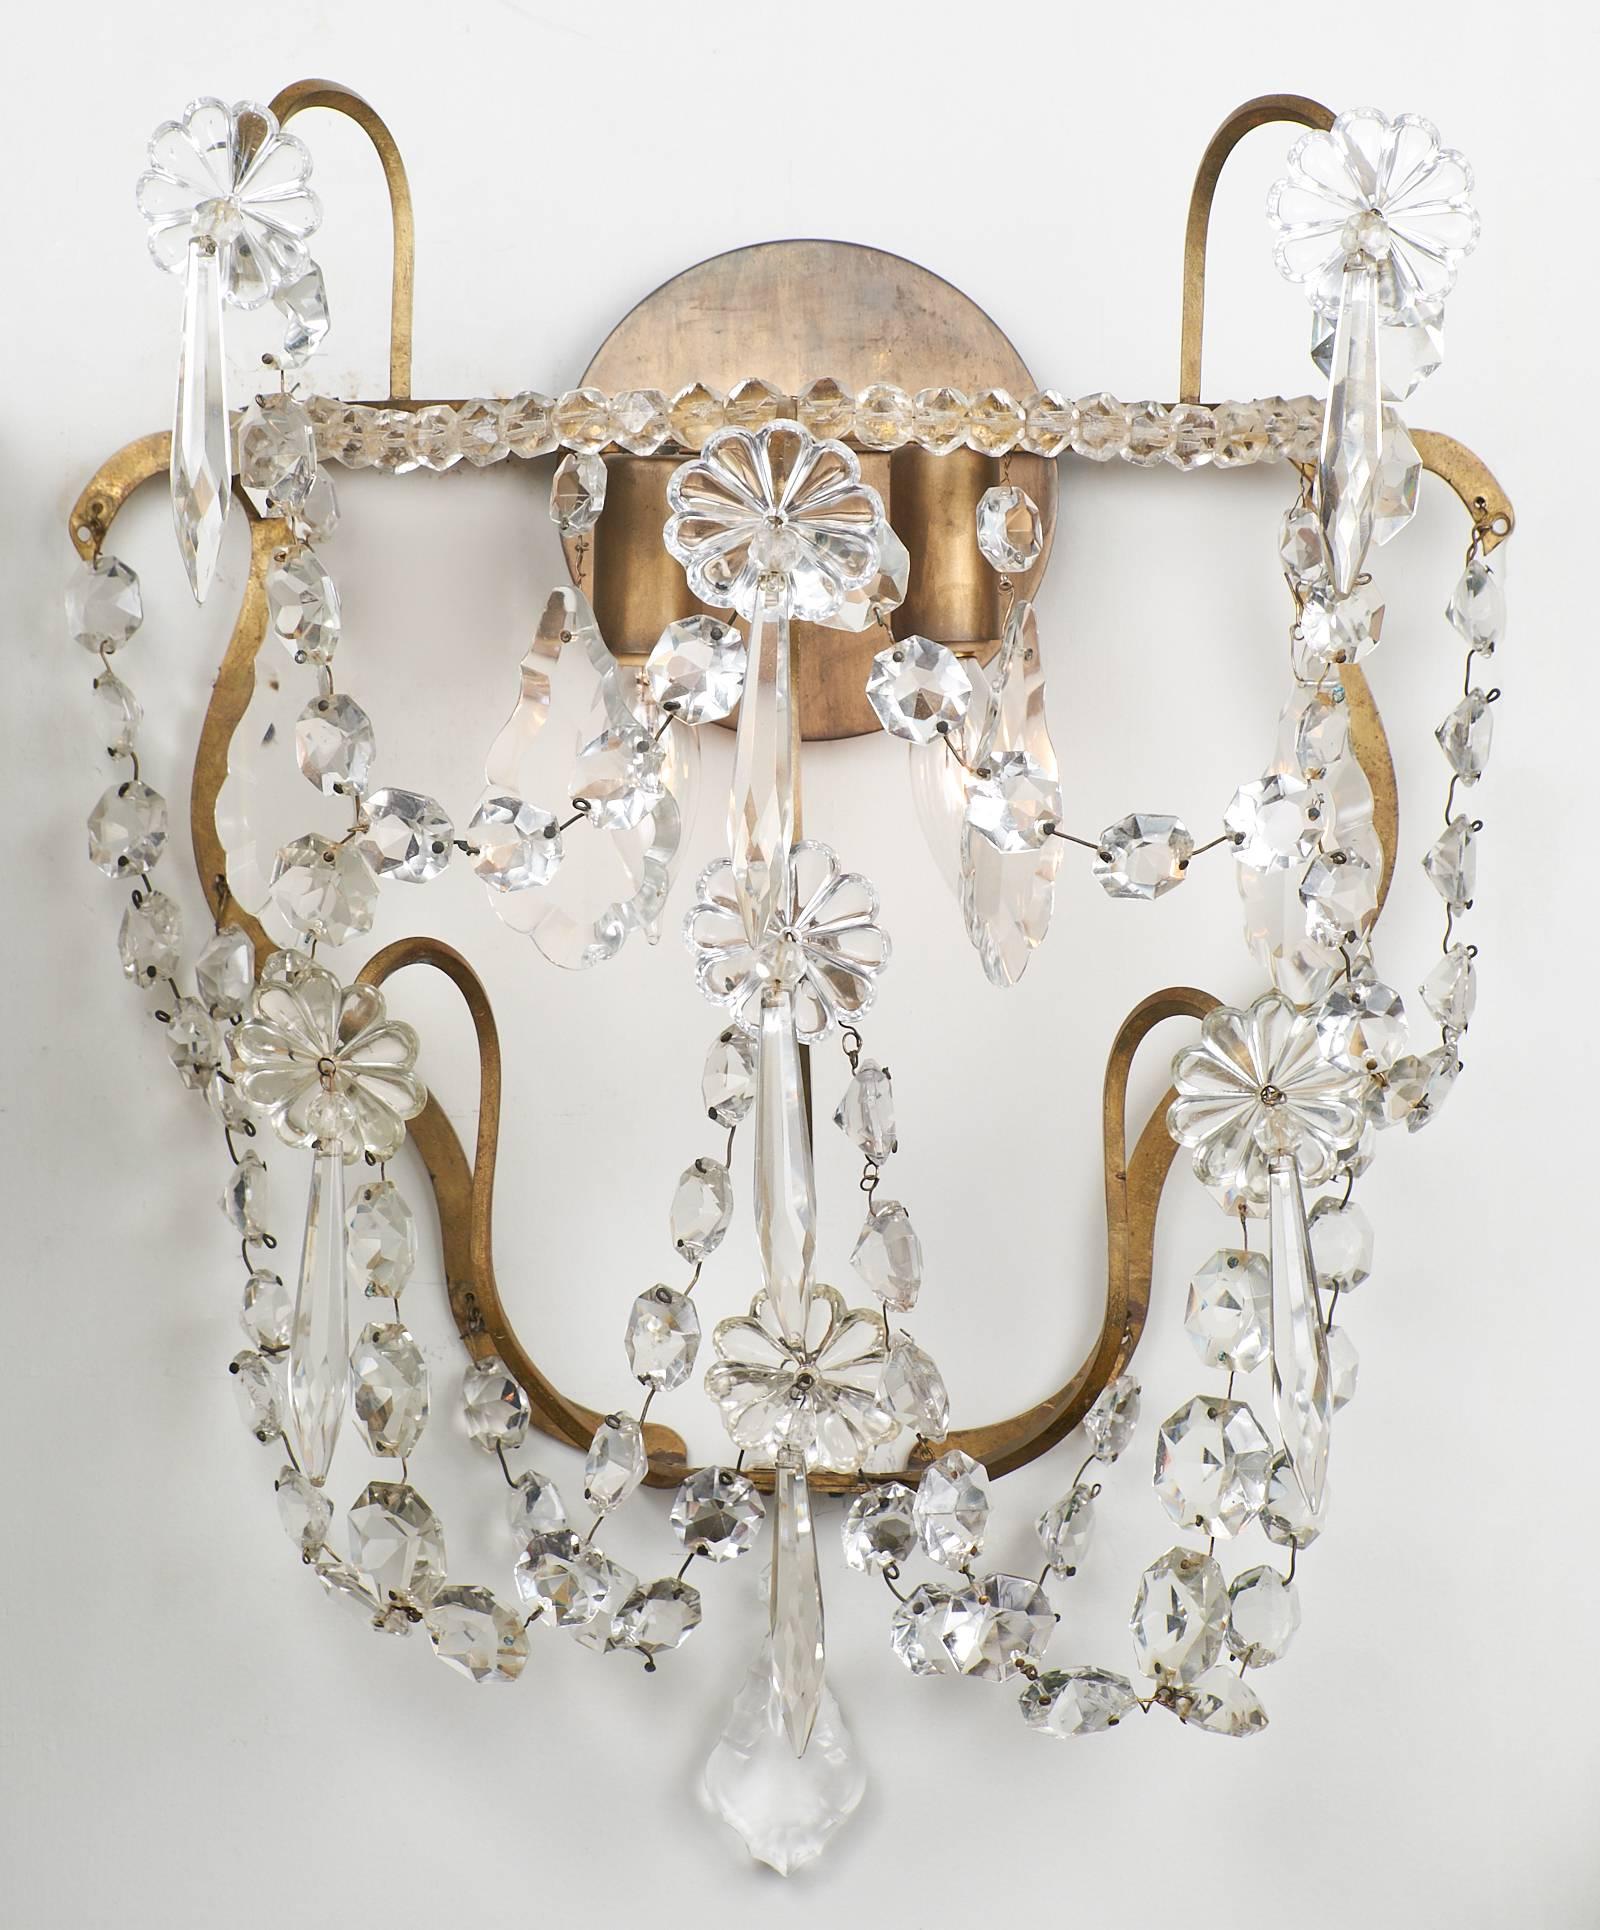 Art Deco Vintage French Sconces in the Style of Maison Baguès